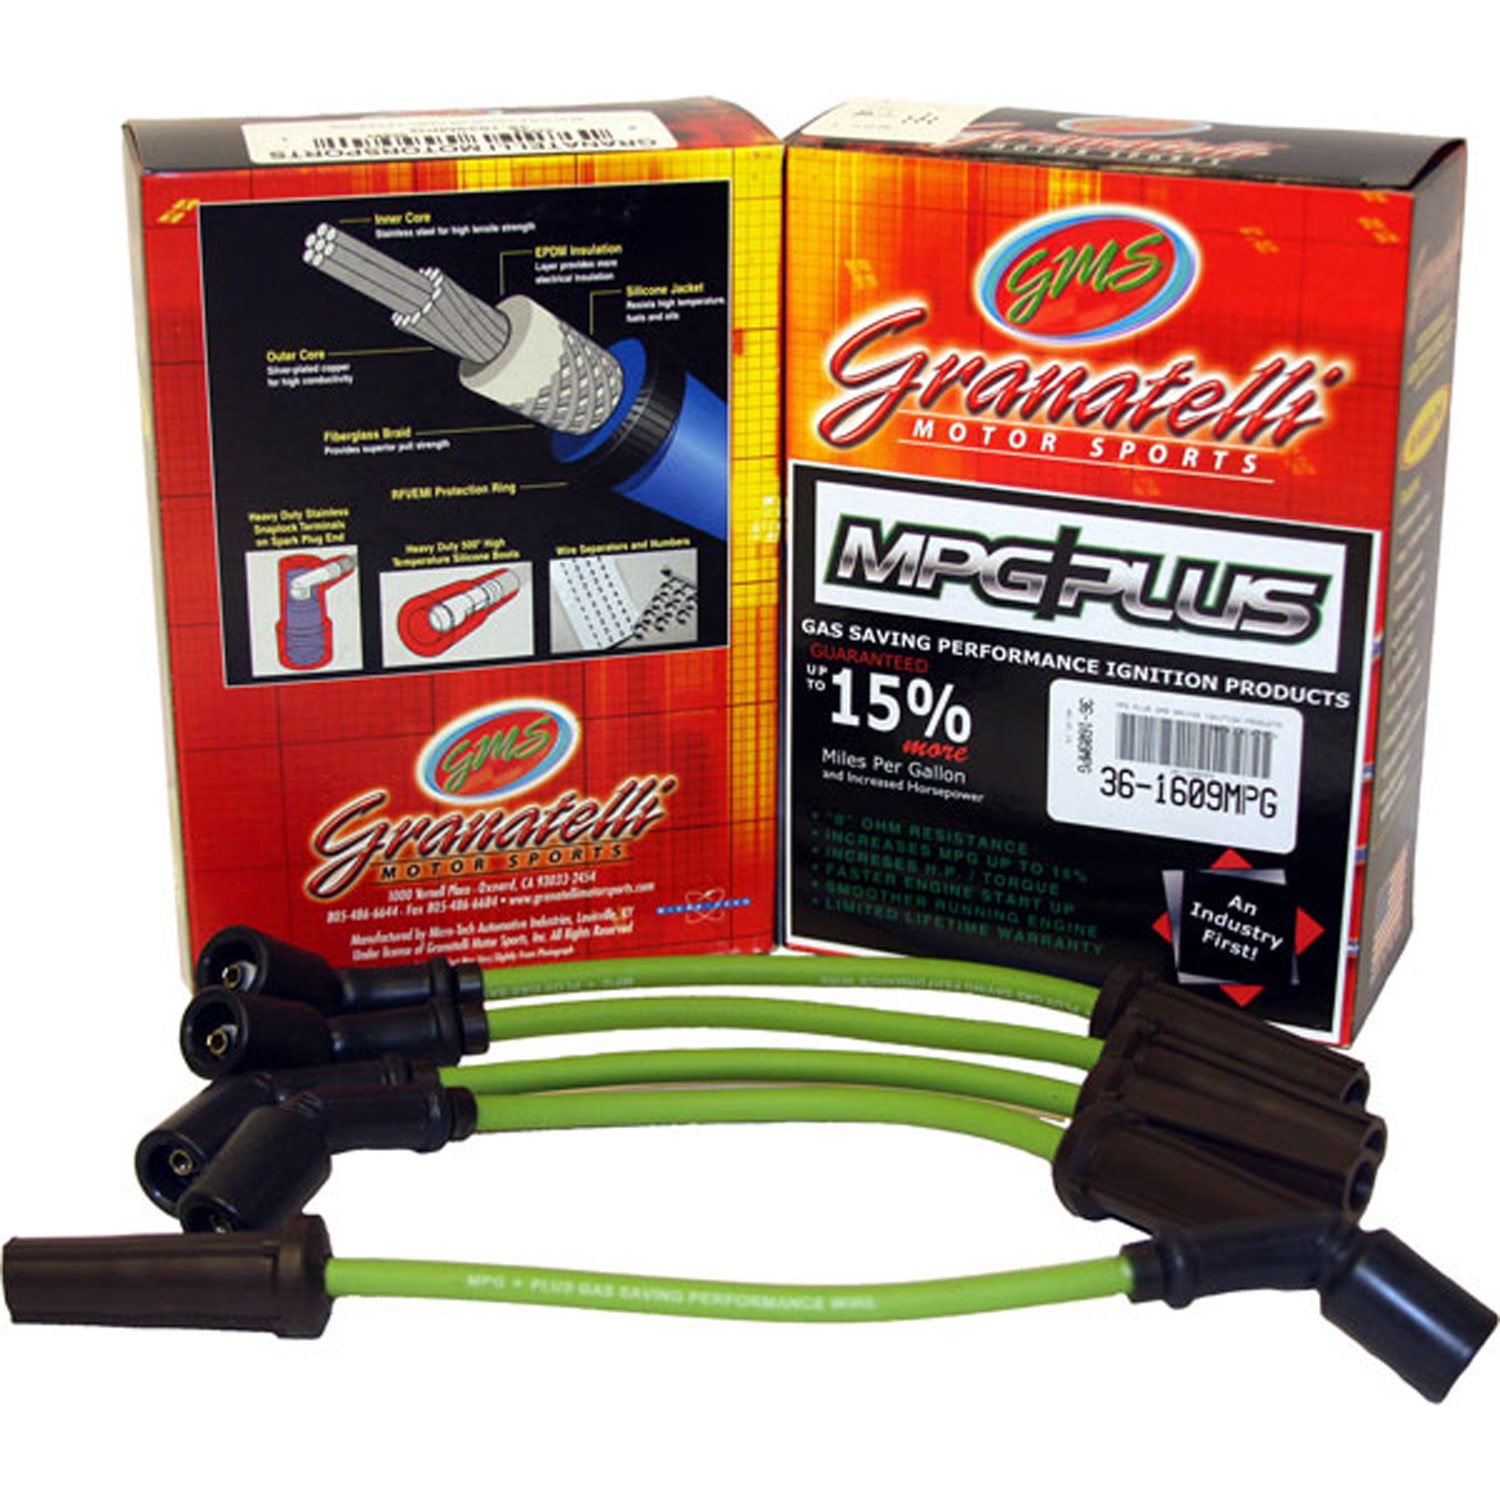 MPG Wires TOYOTA 4 RUNNER 4CYL 2.4L 89-92